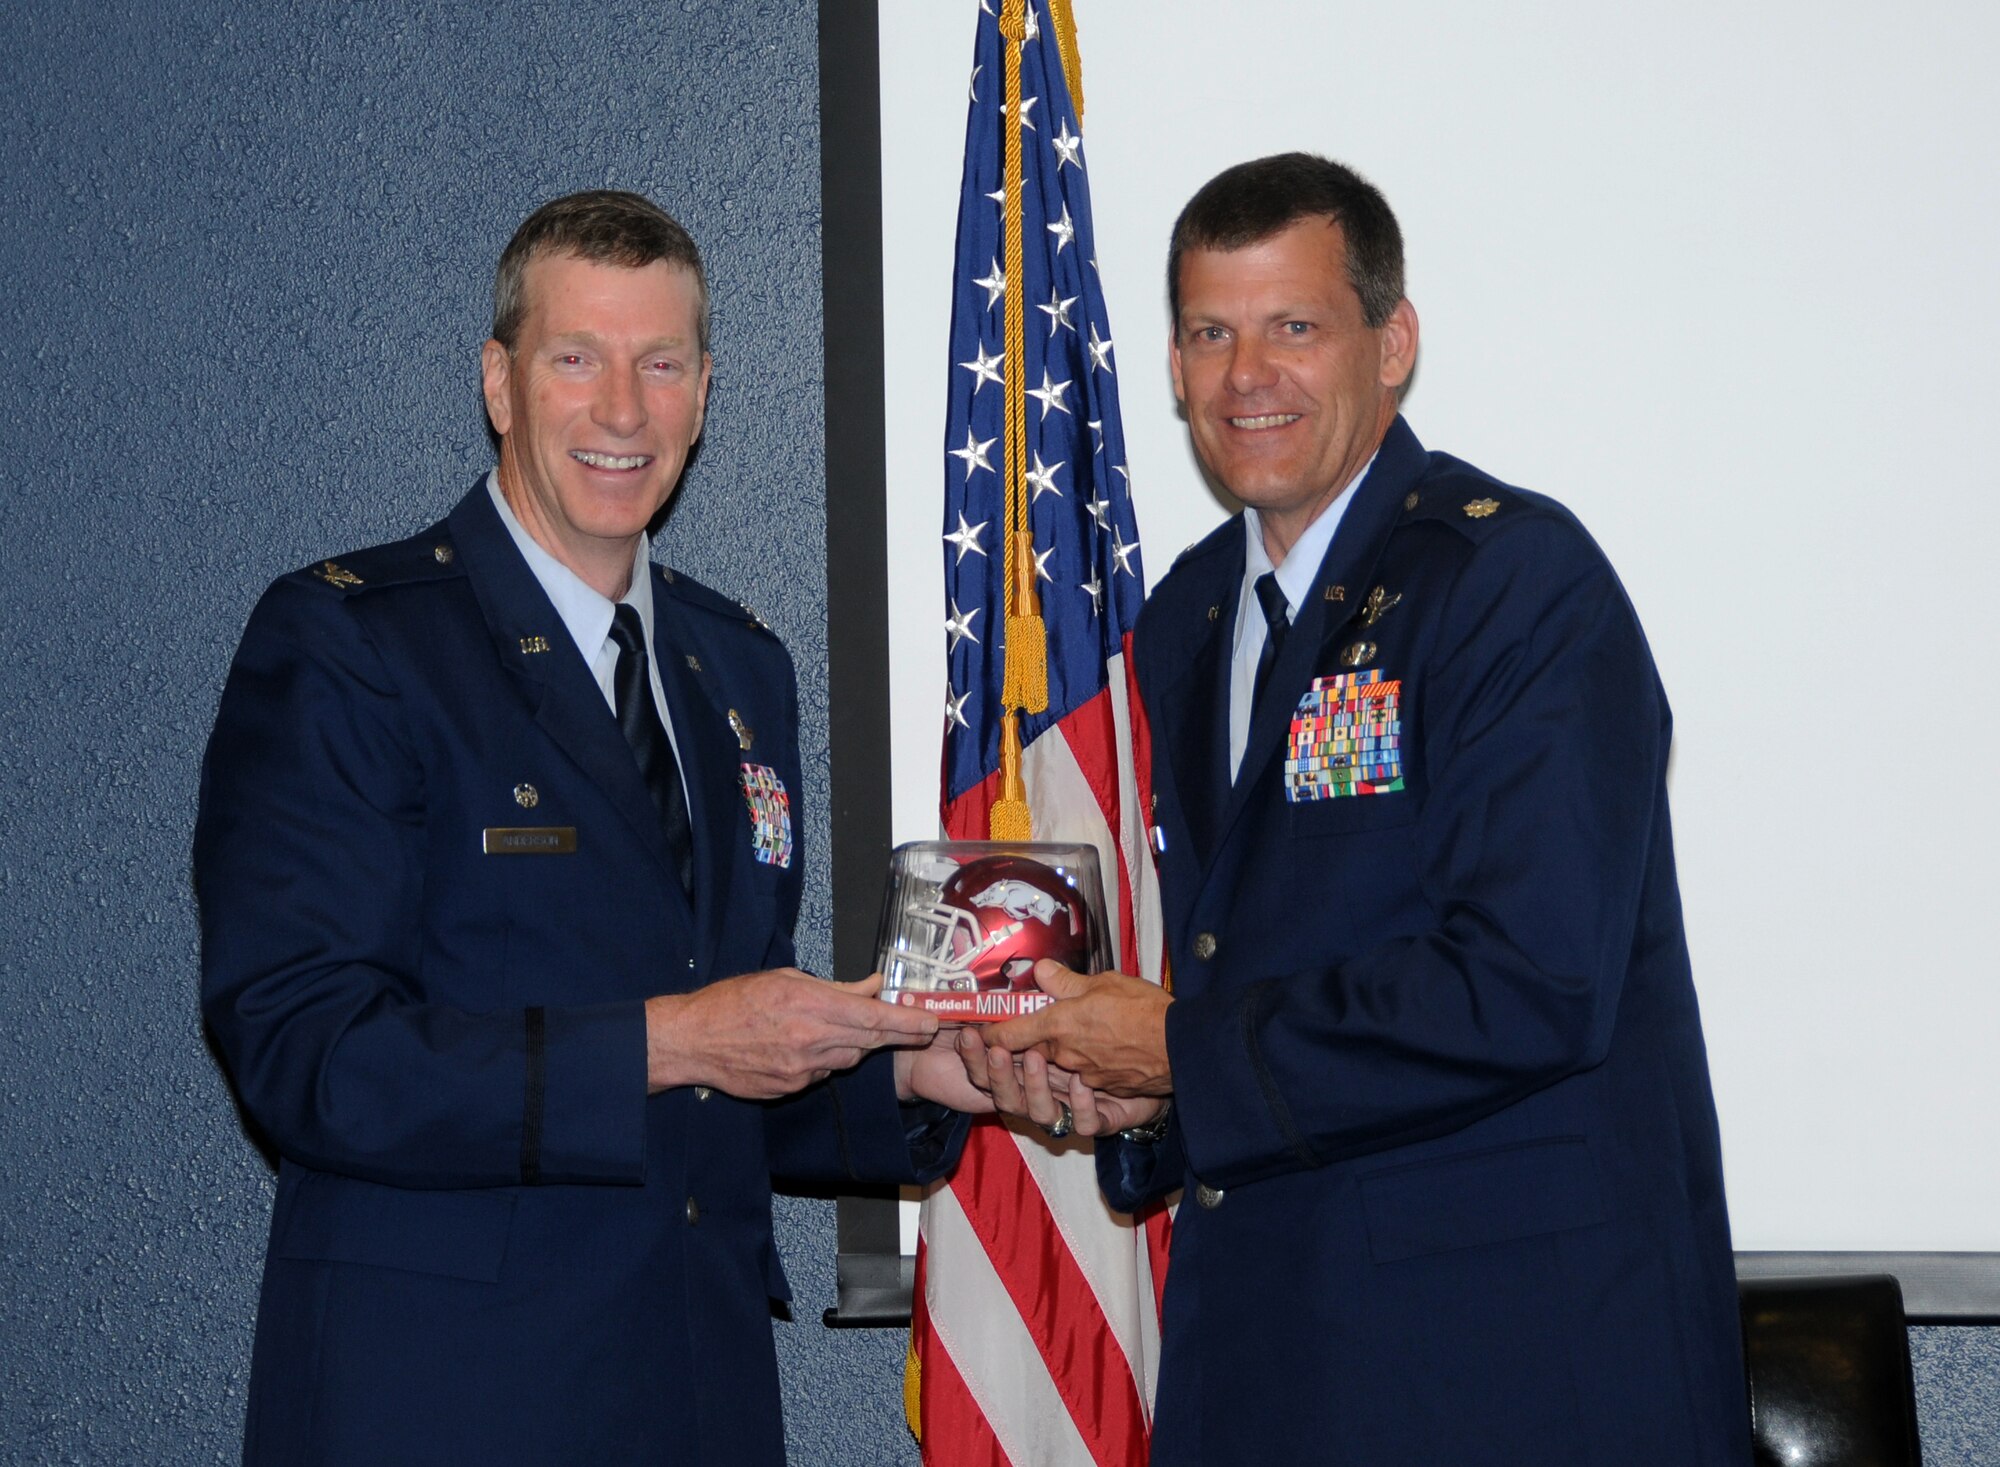 Col. Brian Burger, a lifelong LSU fan, right, proudly holds his Arkansas Razorback football helmet alongside, Col. Mark Anderson, 188th Fighter Wing commander. Burger, 188th Operations Group commander, was promoted to the rank of colonel during the ceremony held at the 188th. The helmet was a gift from Anderson. (U.S. Air National Guard photo by Senior Airman John Hillier/188th Fighter Wing Public Affairs)